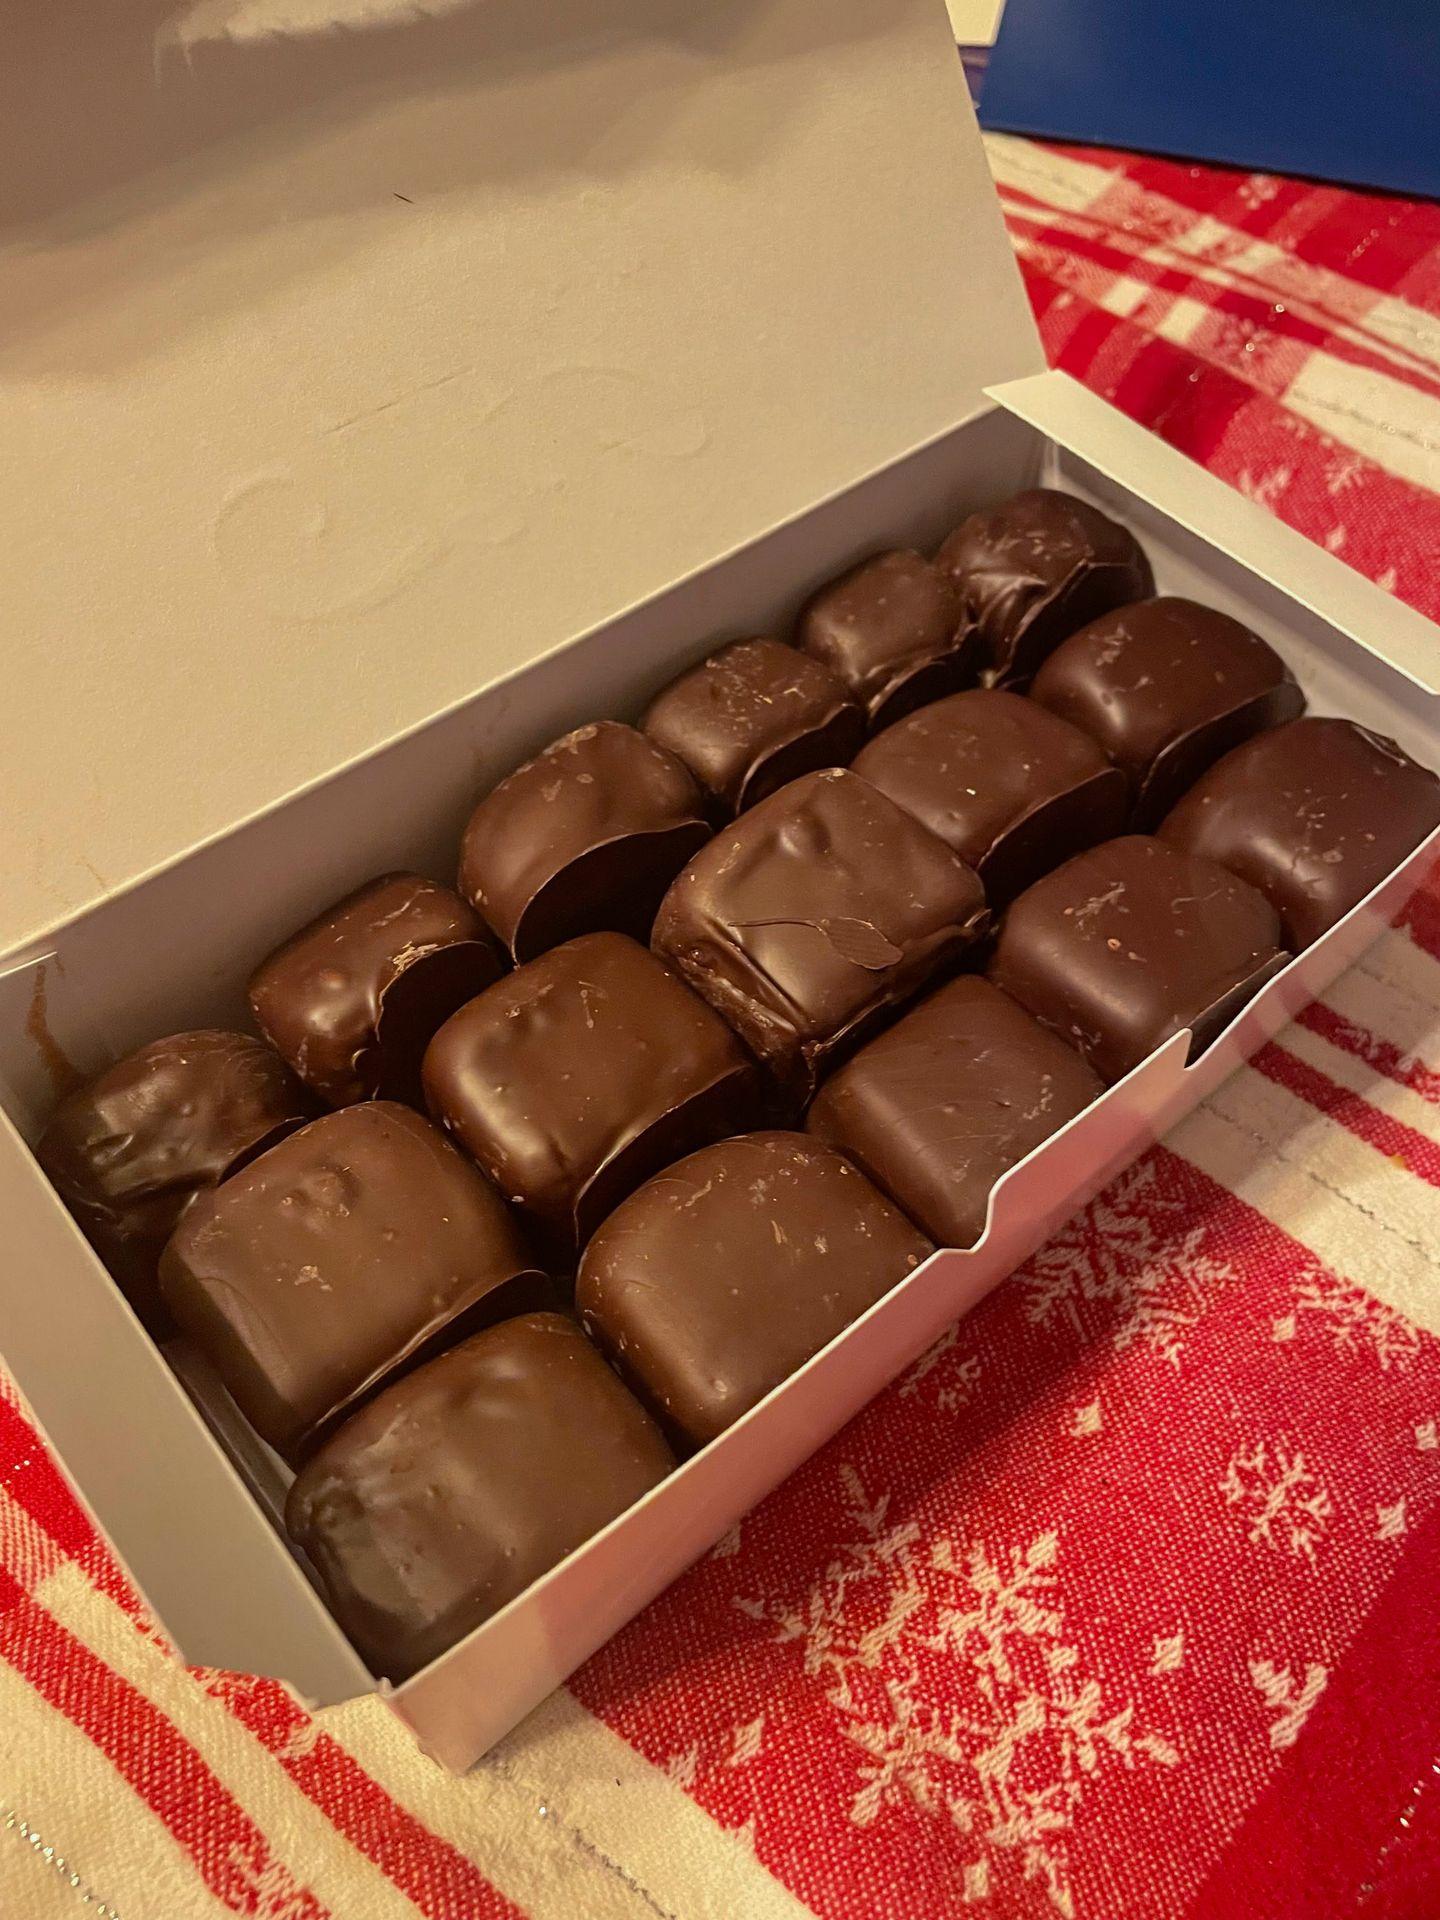 A box full of several pieces of buffalo sponge candy. They look like chocolate squares with rounded edges.